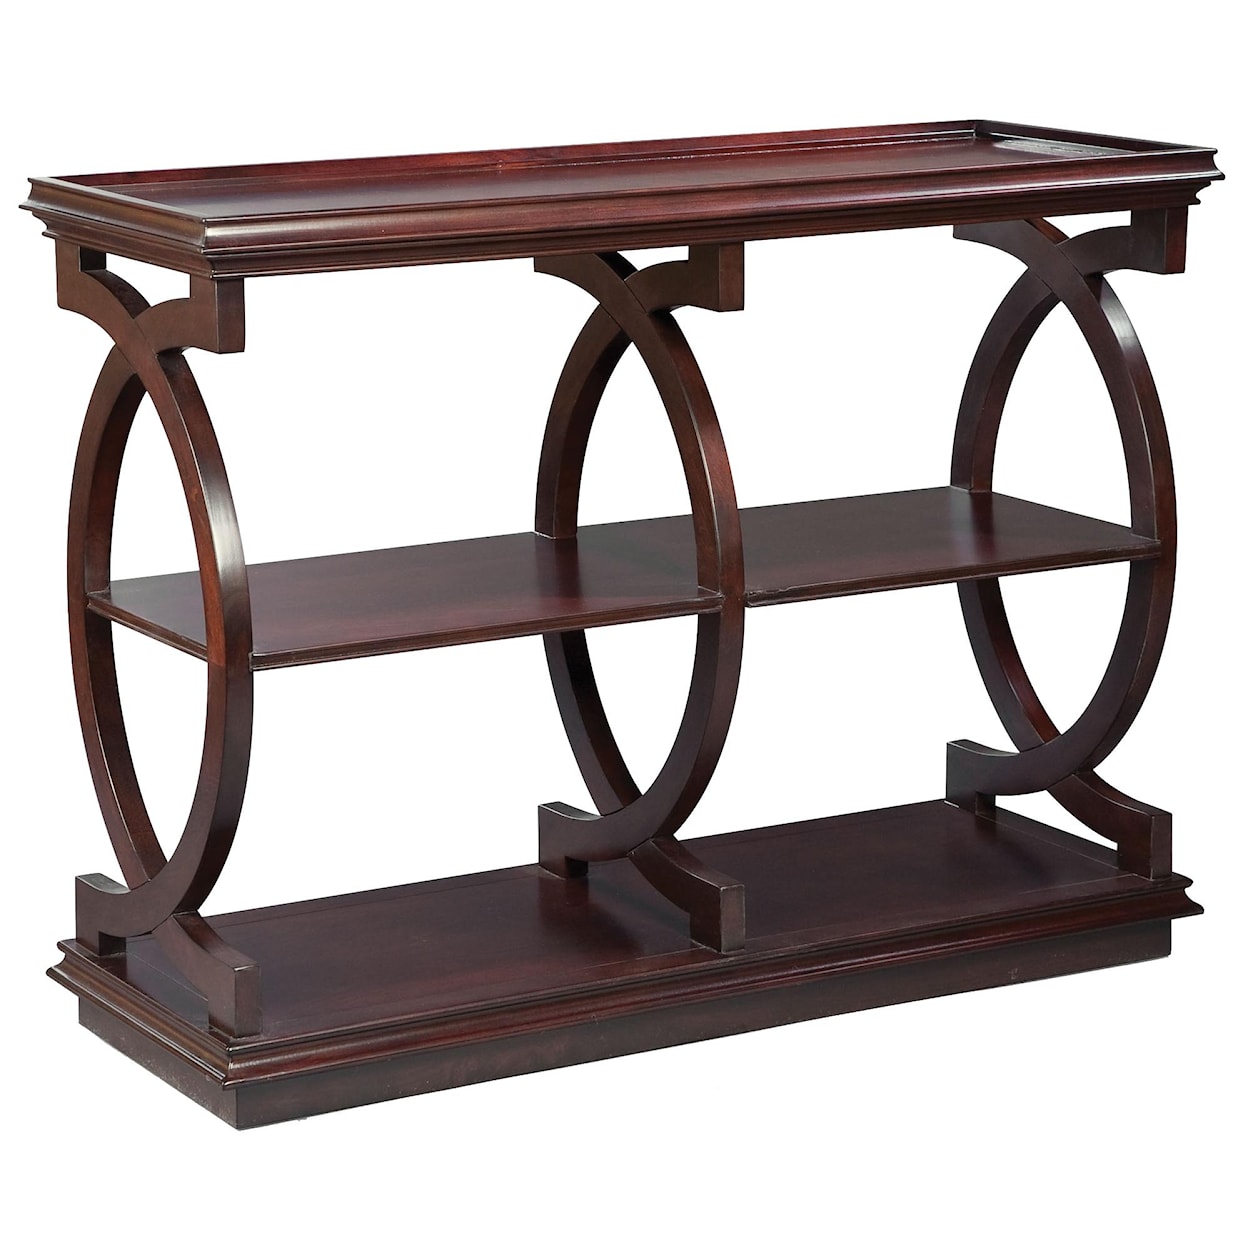 Fairfield Tables Traditional Styled Sofa Table